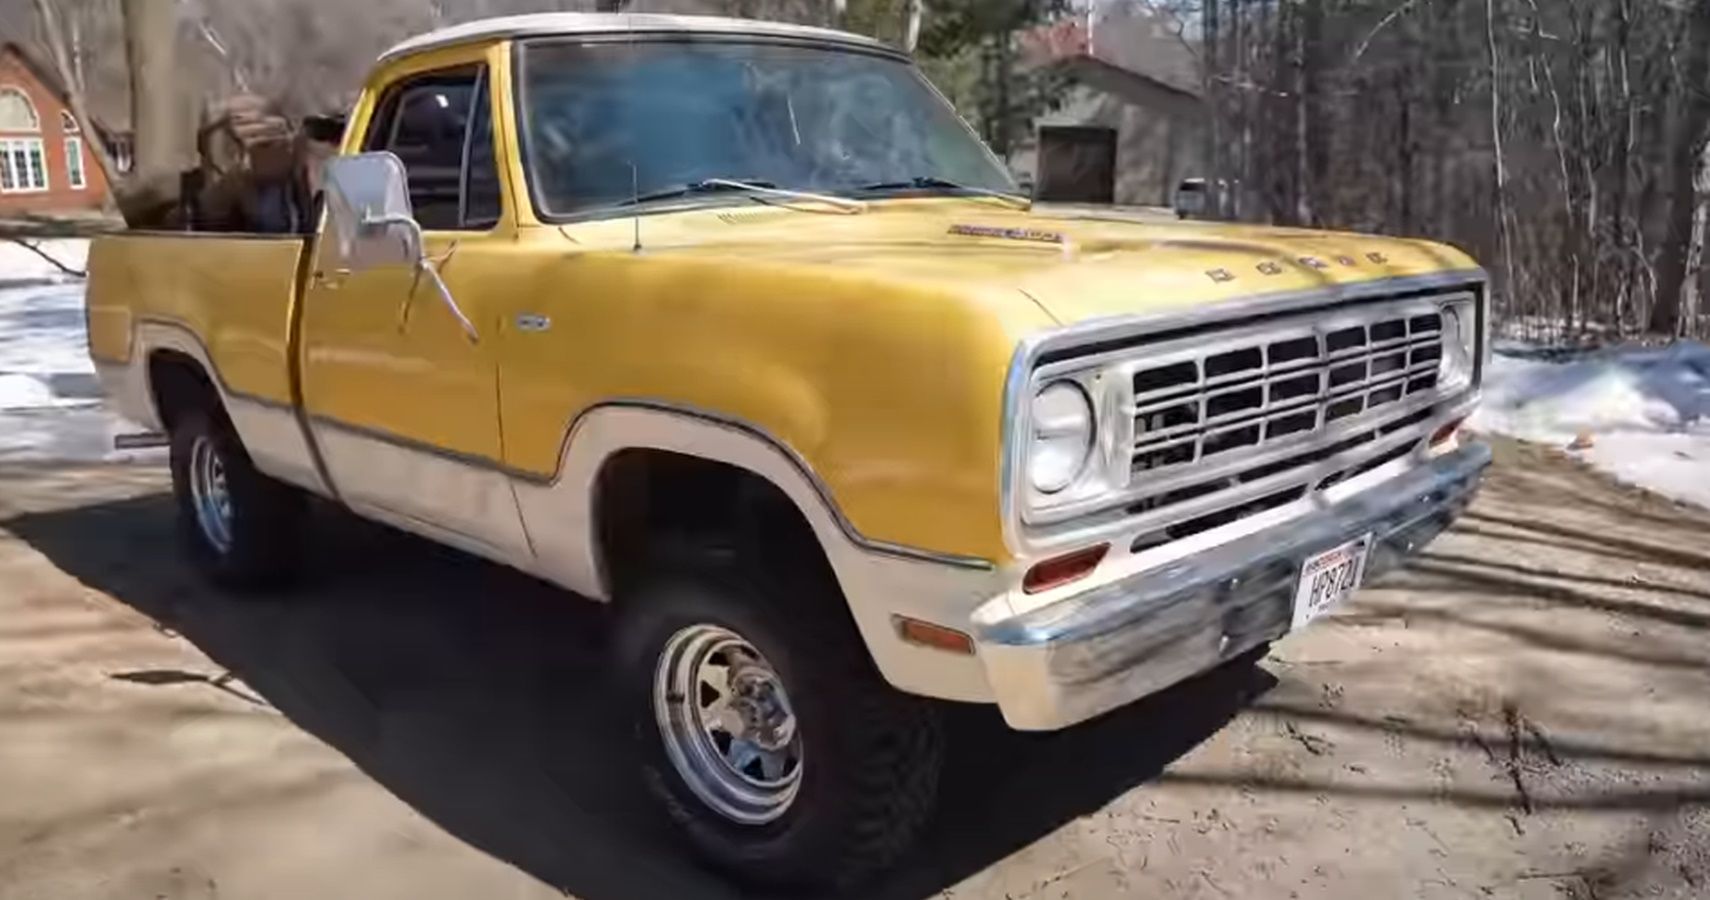 A yellow and white 1975 Dodge D100 Power Wagon in a driveway